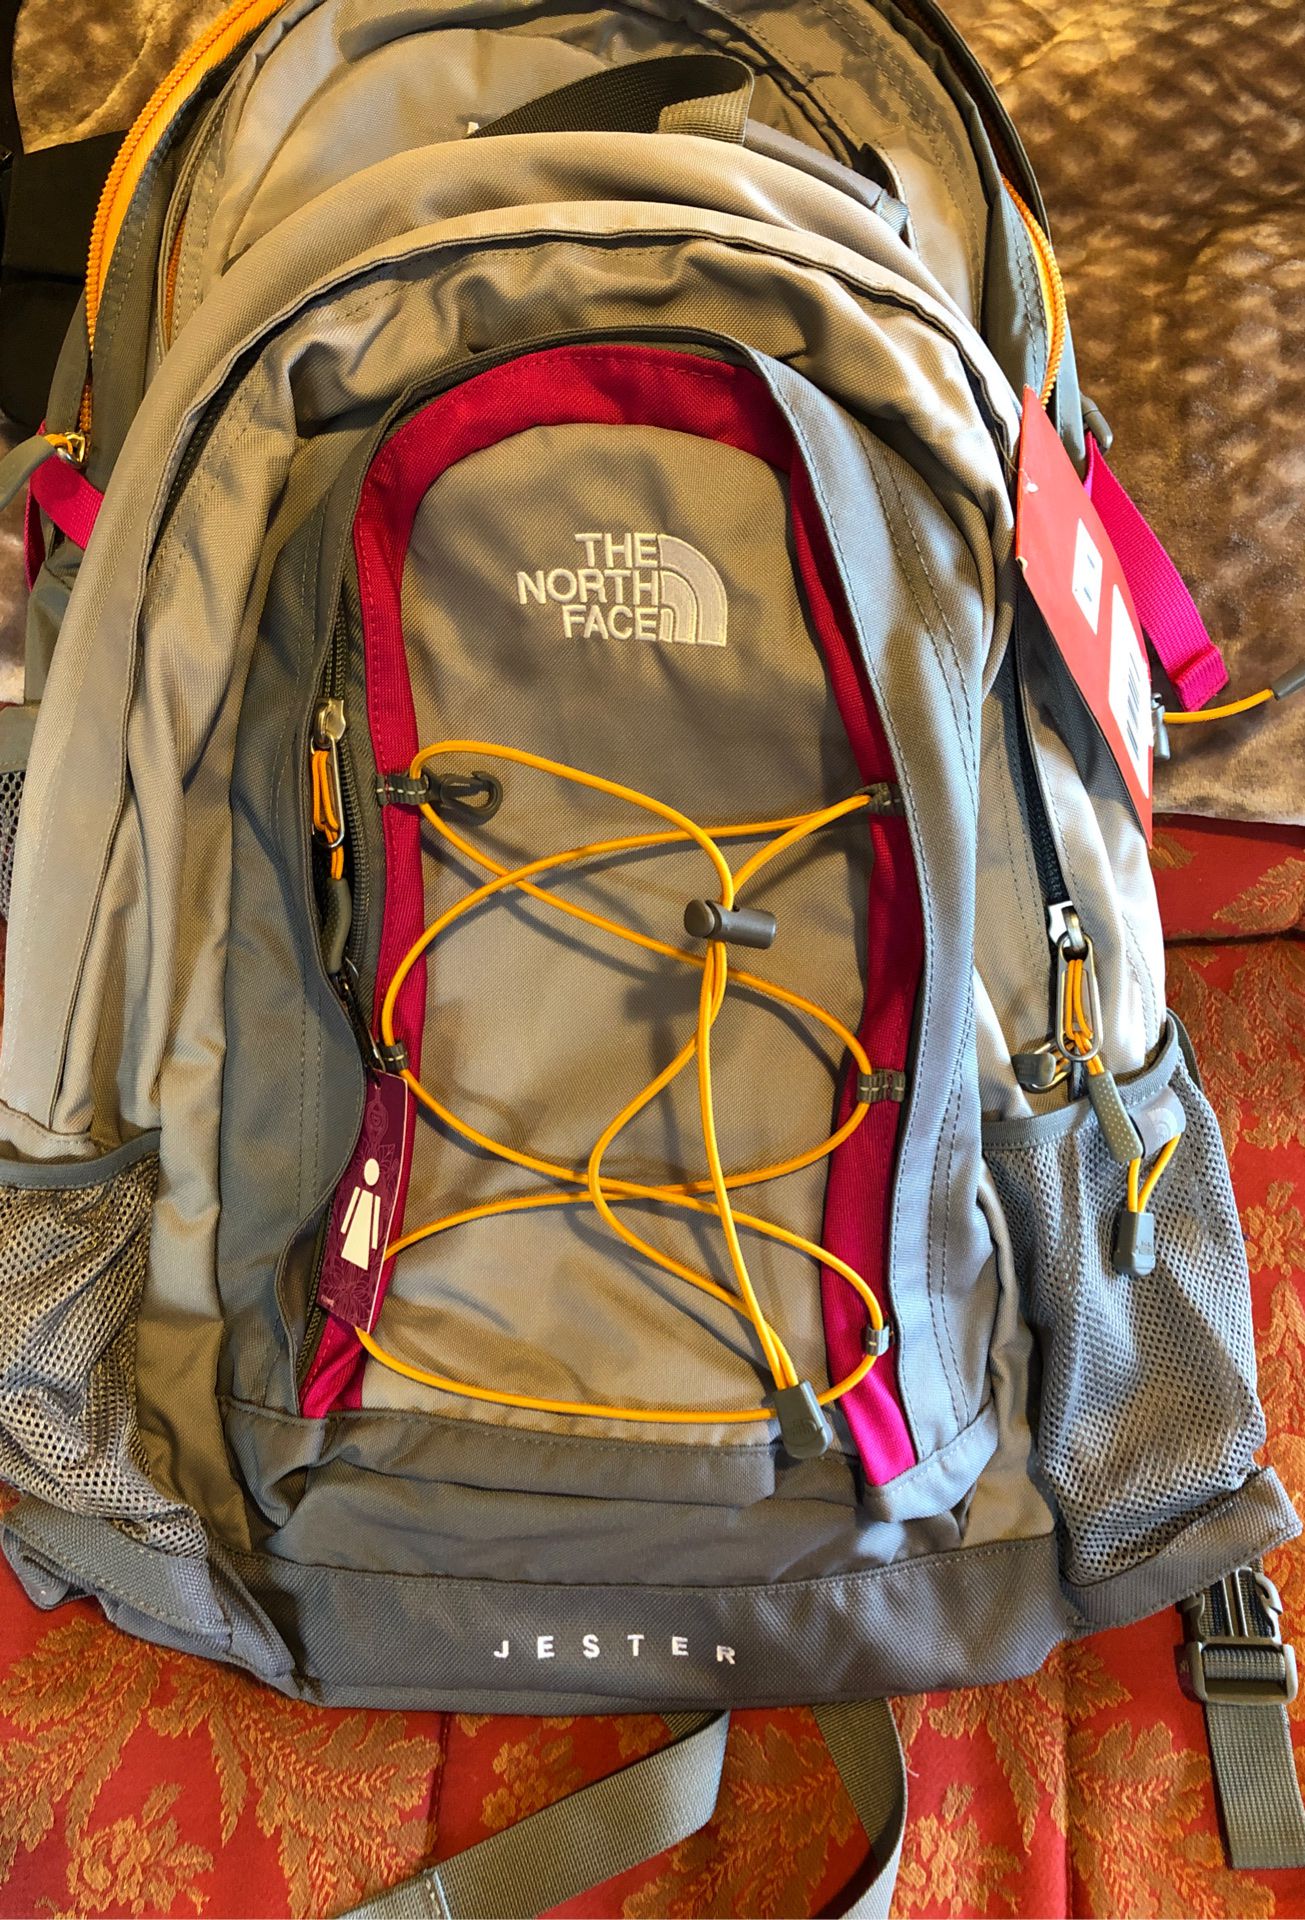 NWT The Northface Jester backpack grey and pink